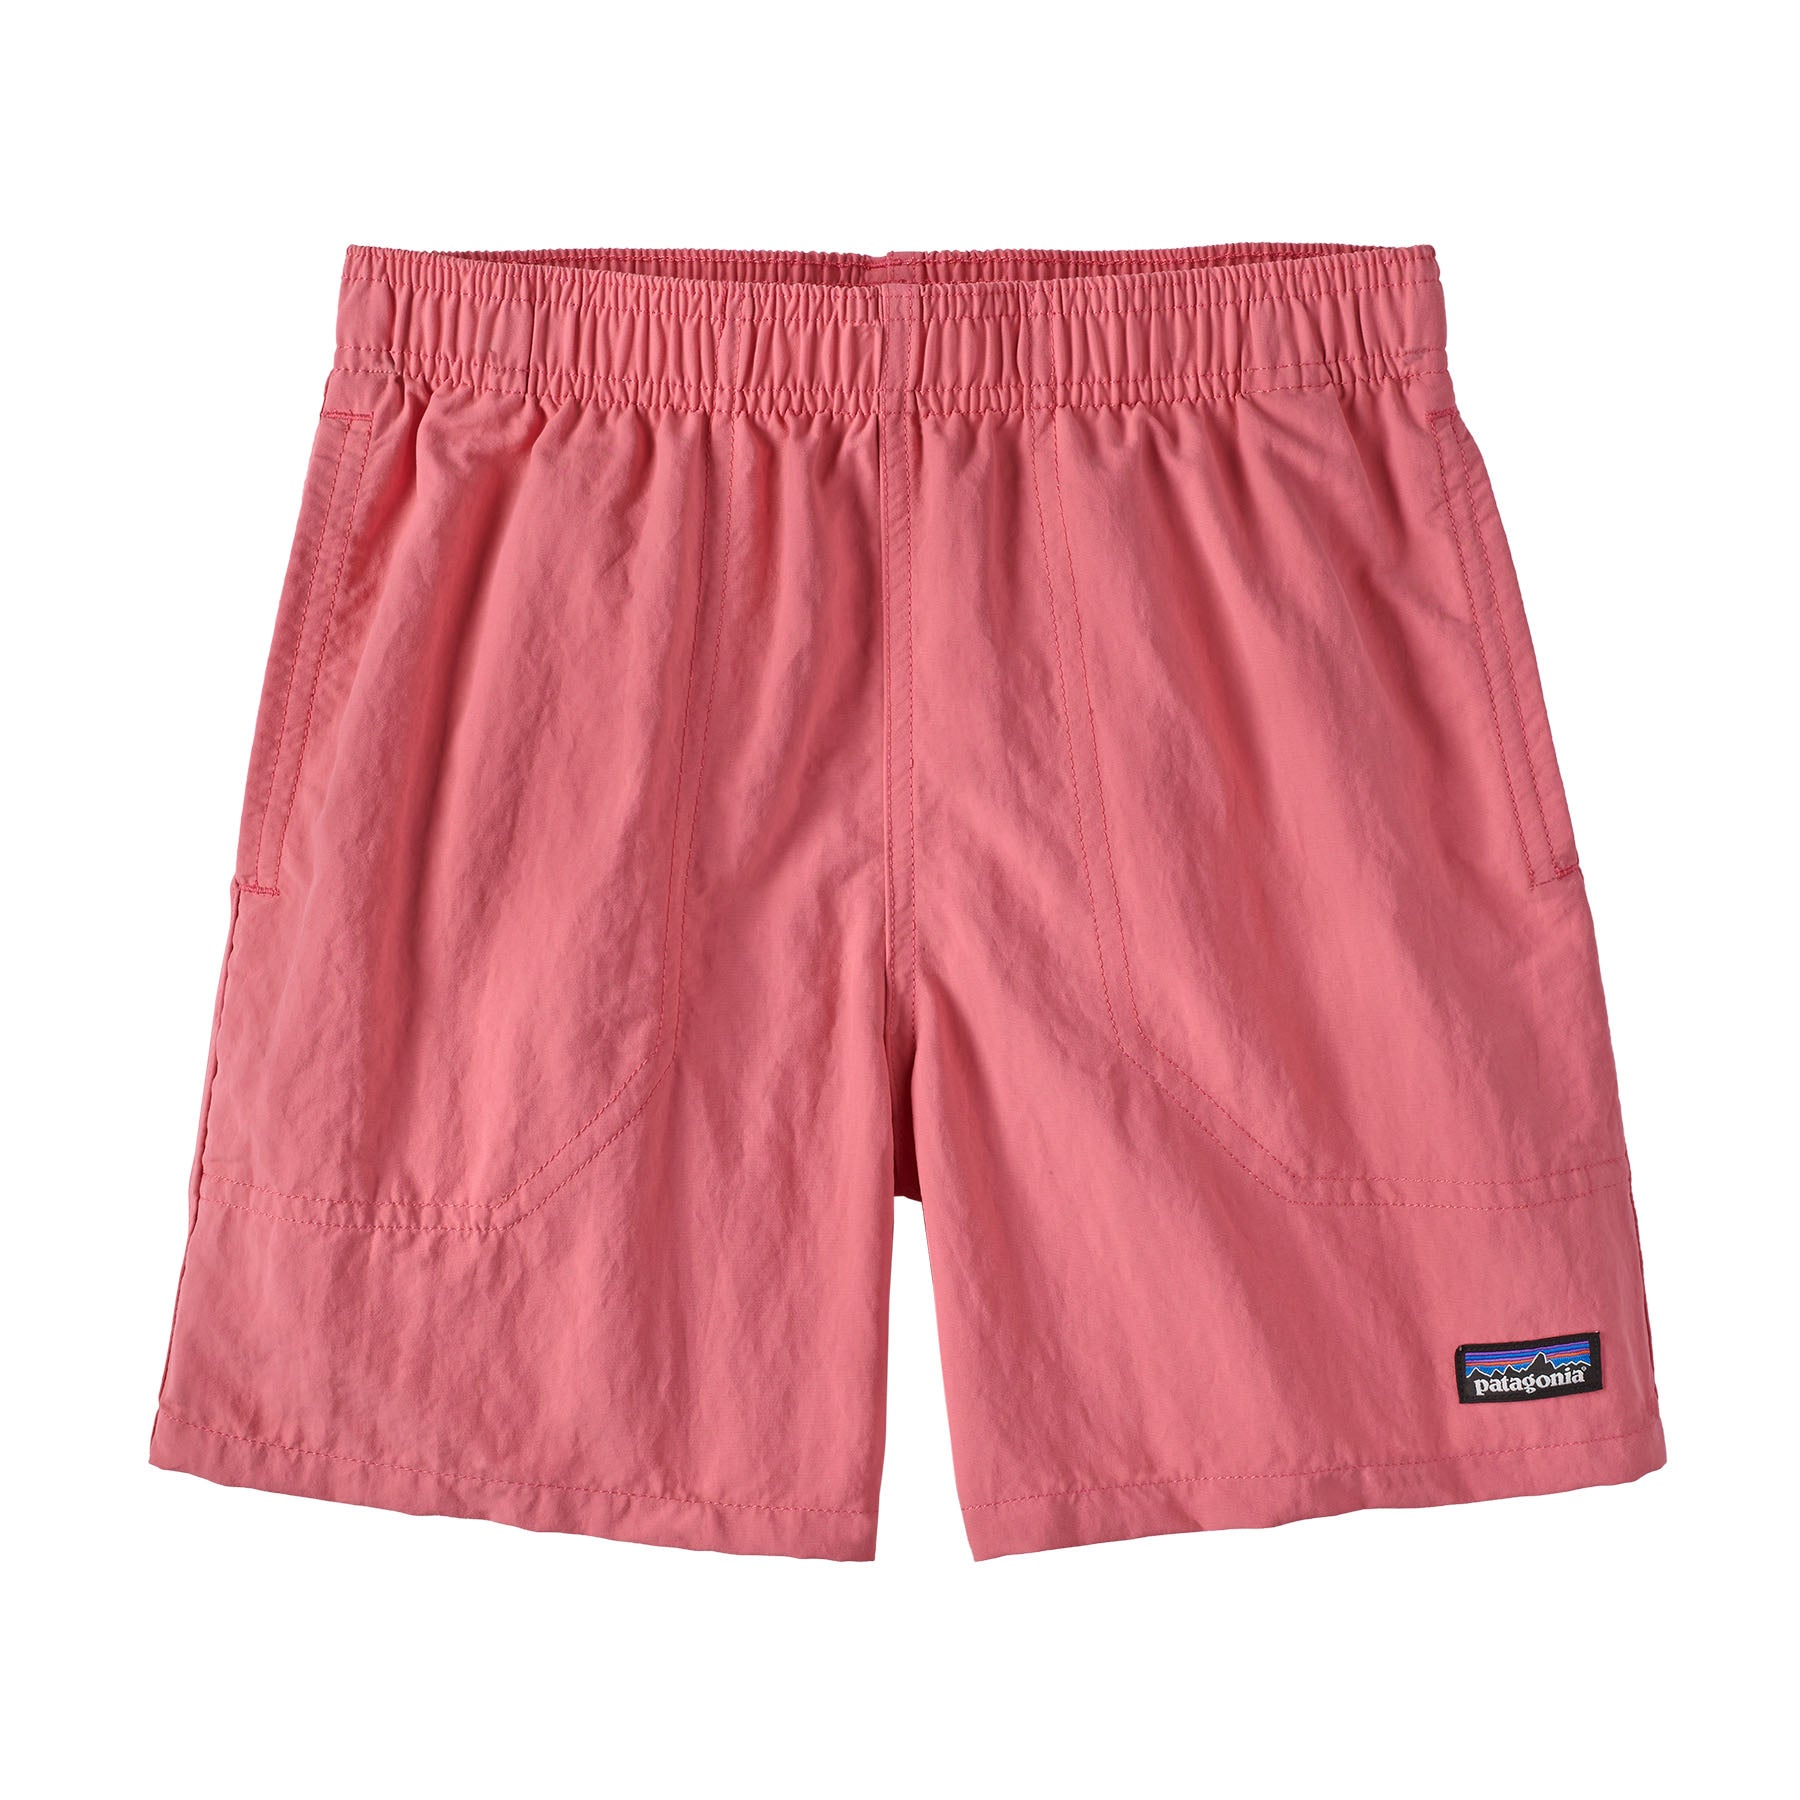 Kids' Baggies™ Shorts 5 in. - Lined